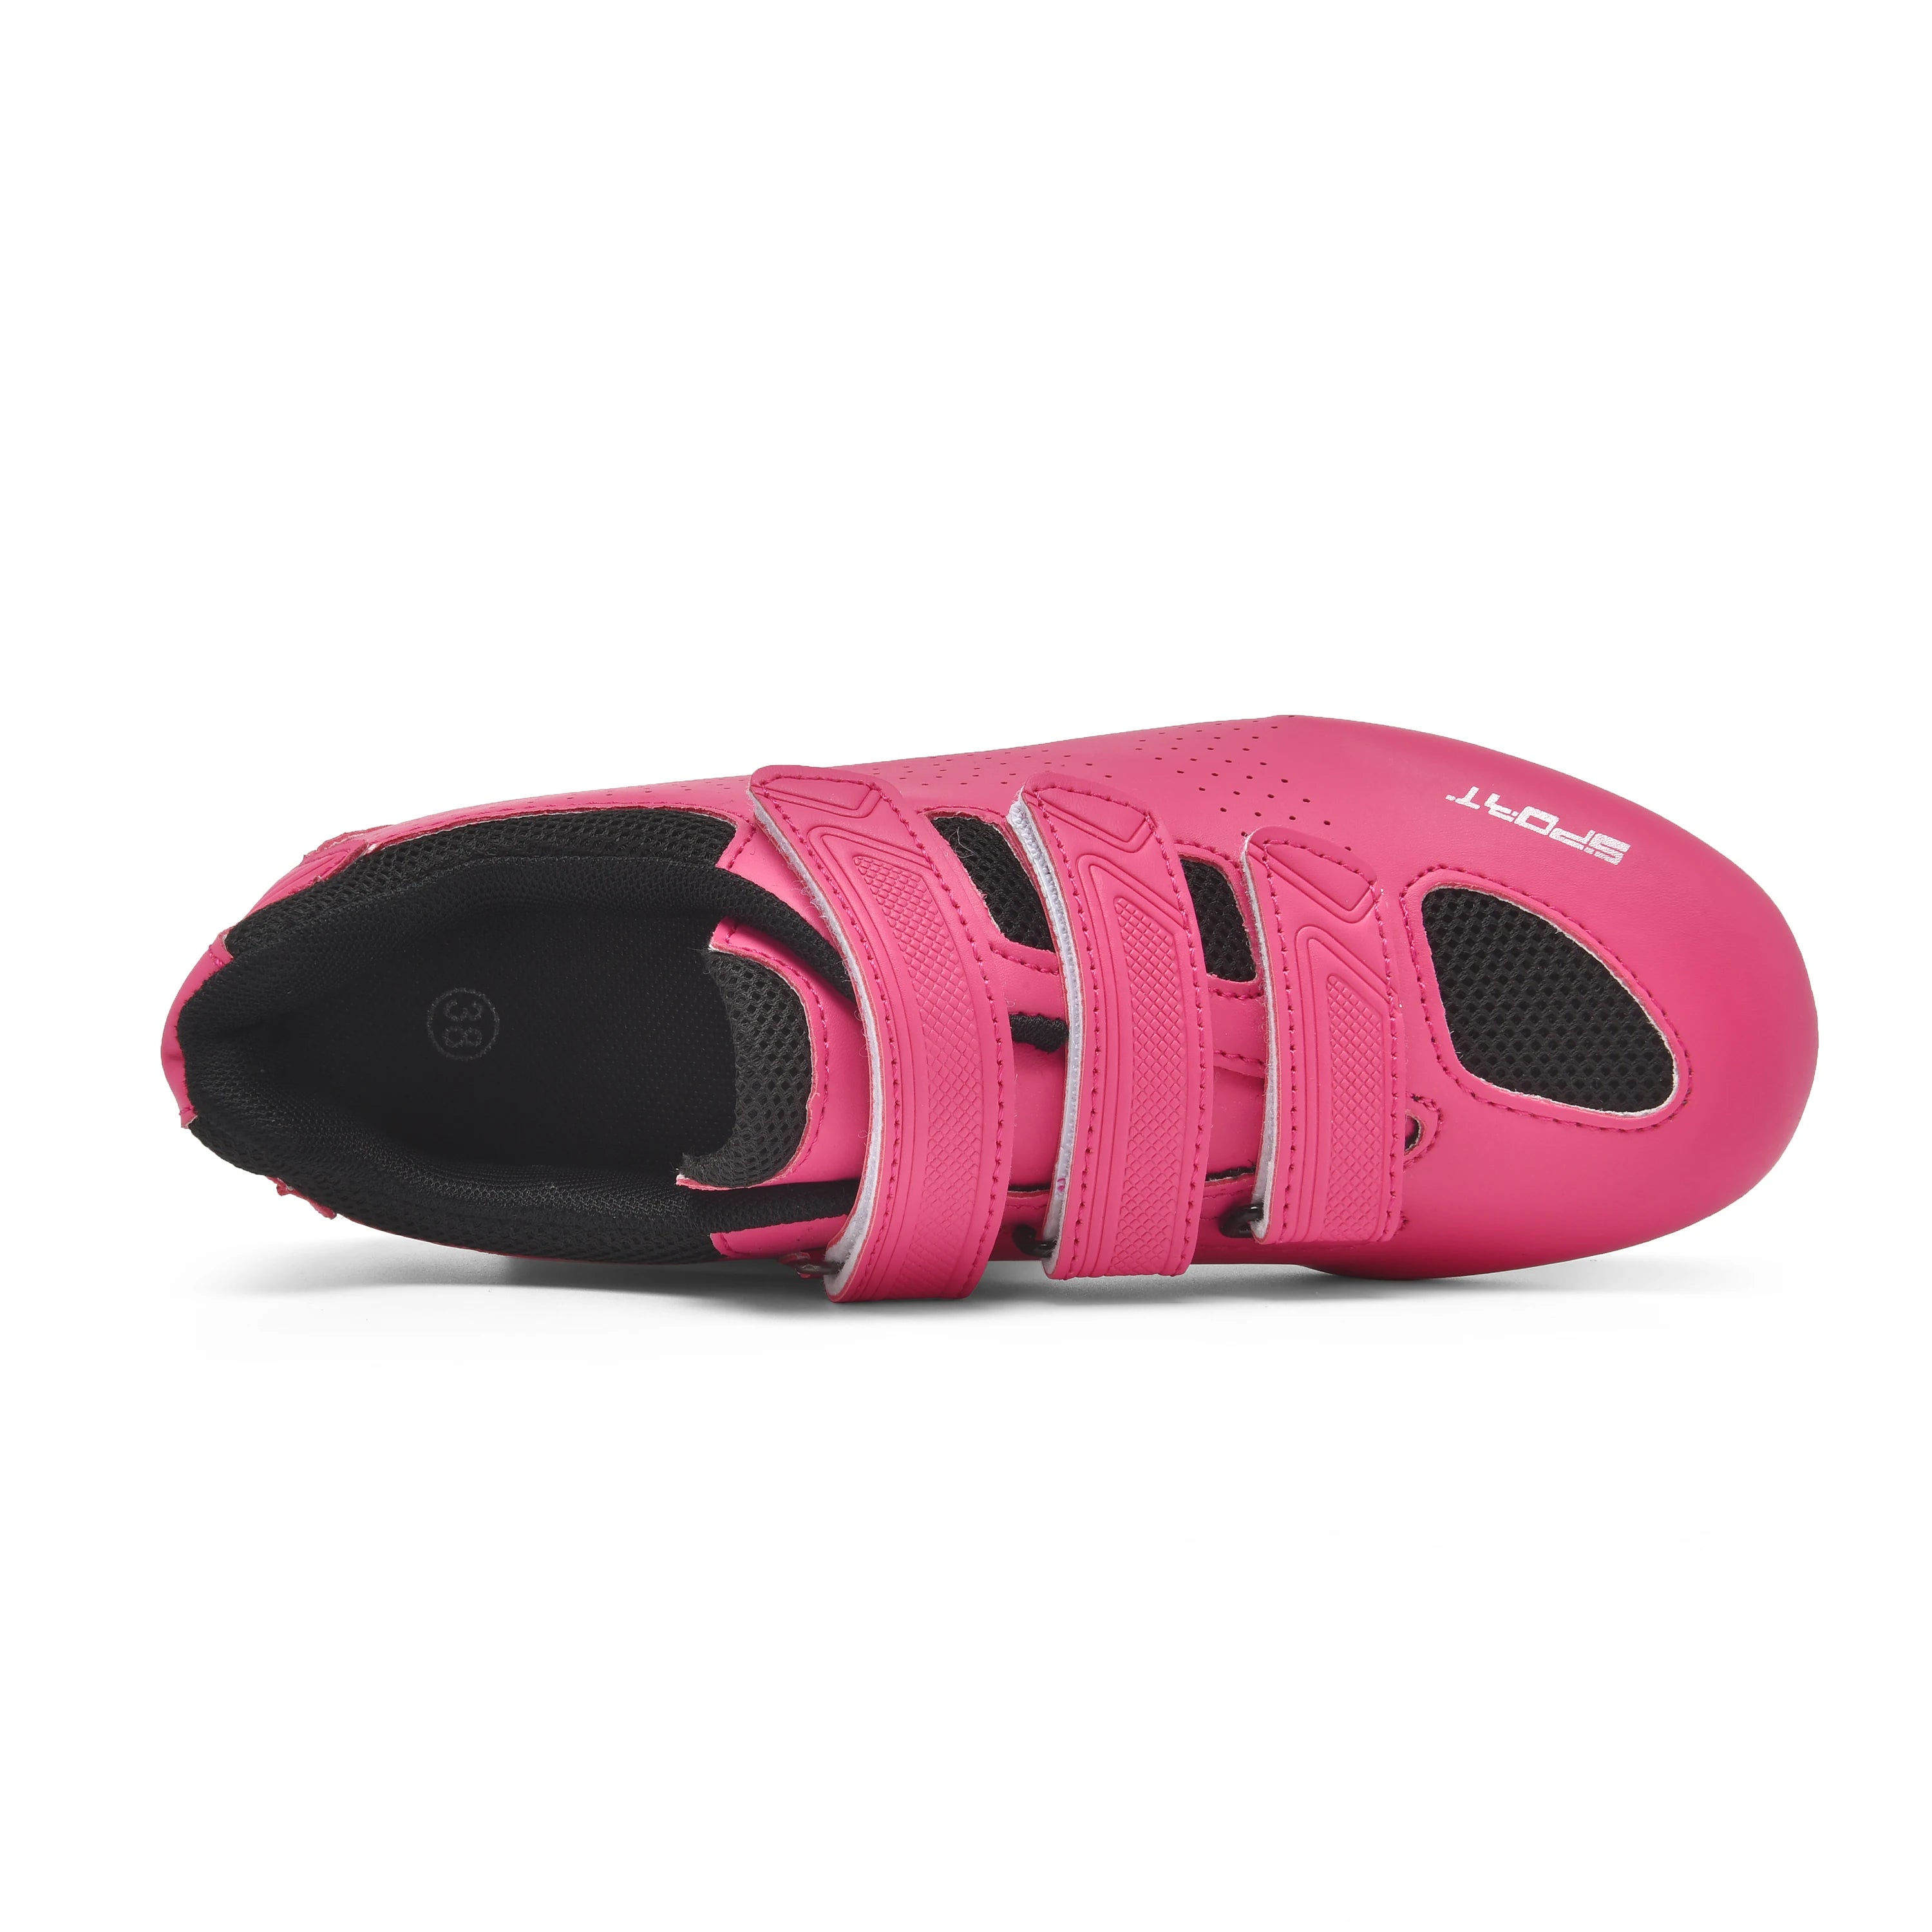 Women Cycling Shoes for Road or Mountain bike- With Cleats,  Cleatless, or flat rubber pink top view